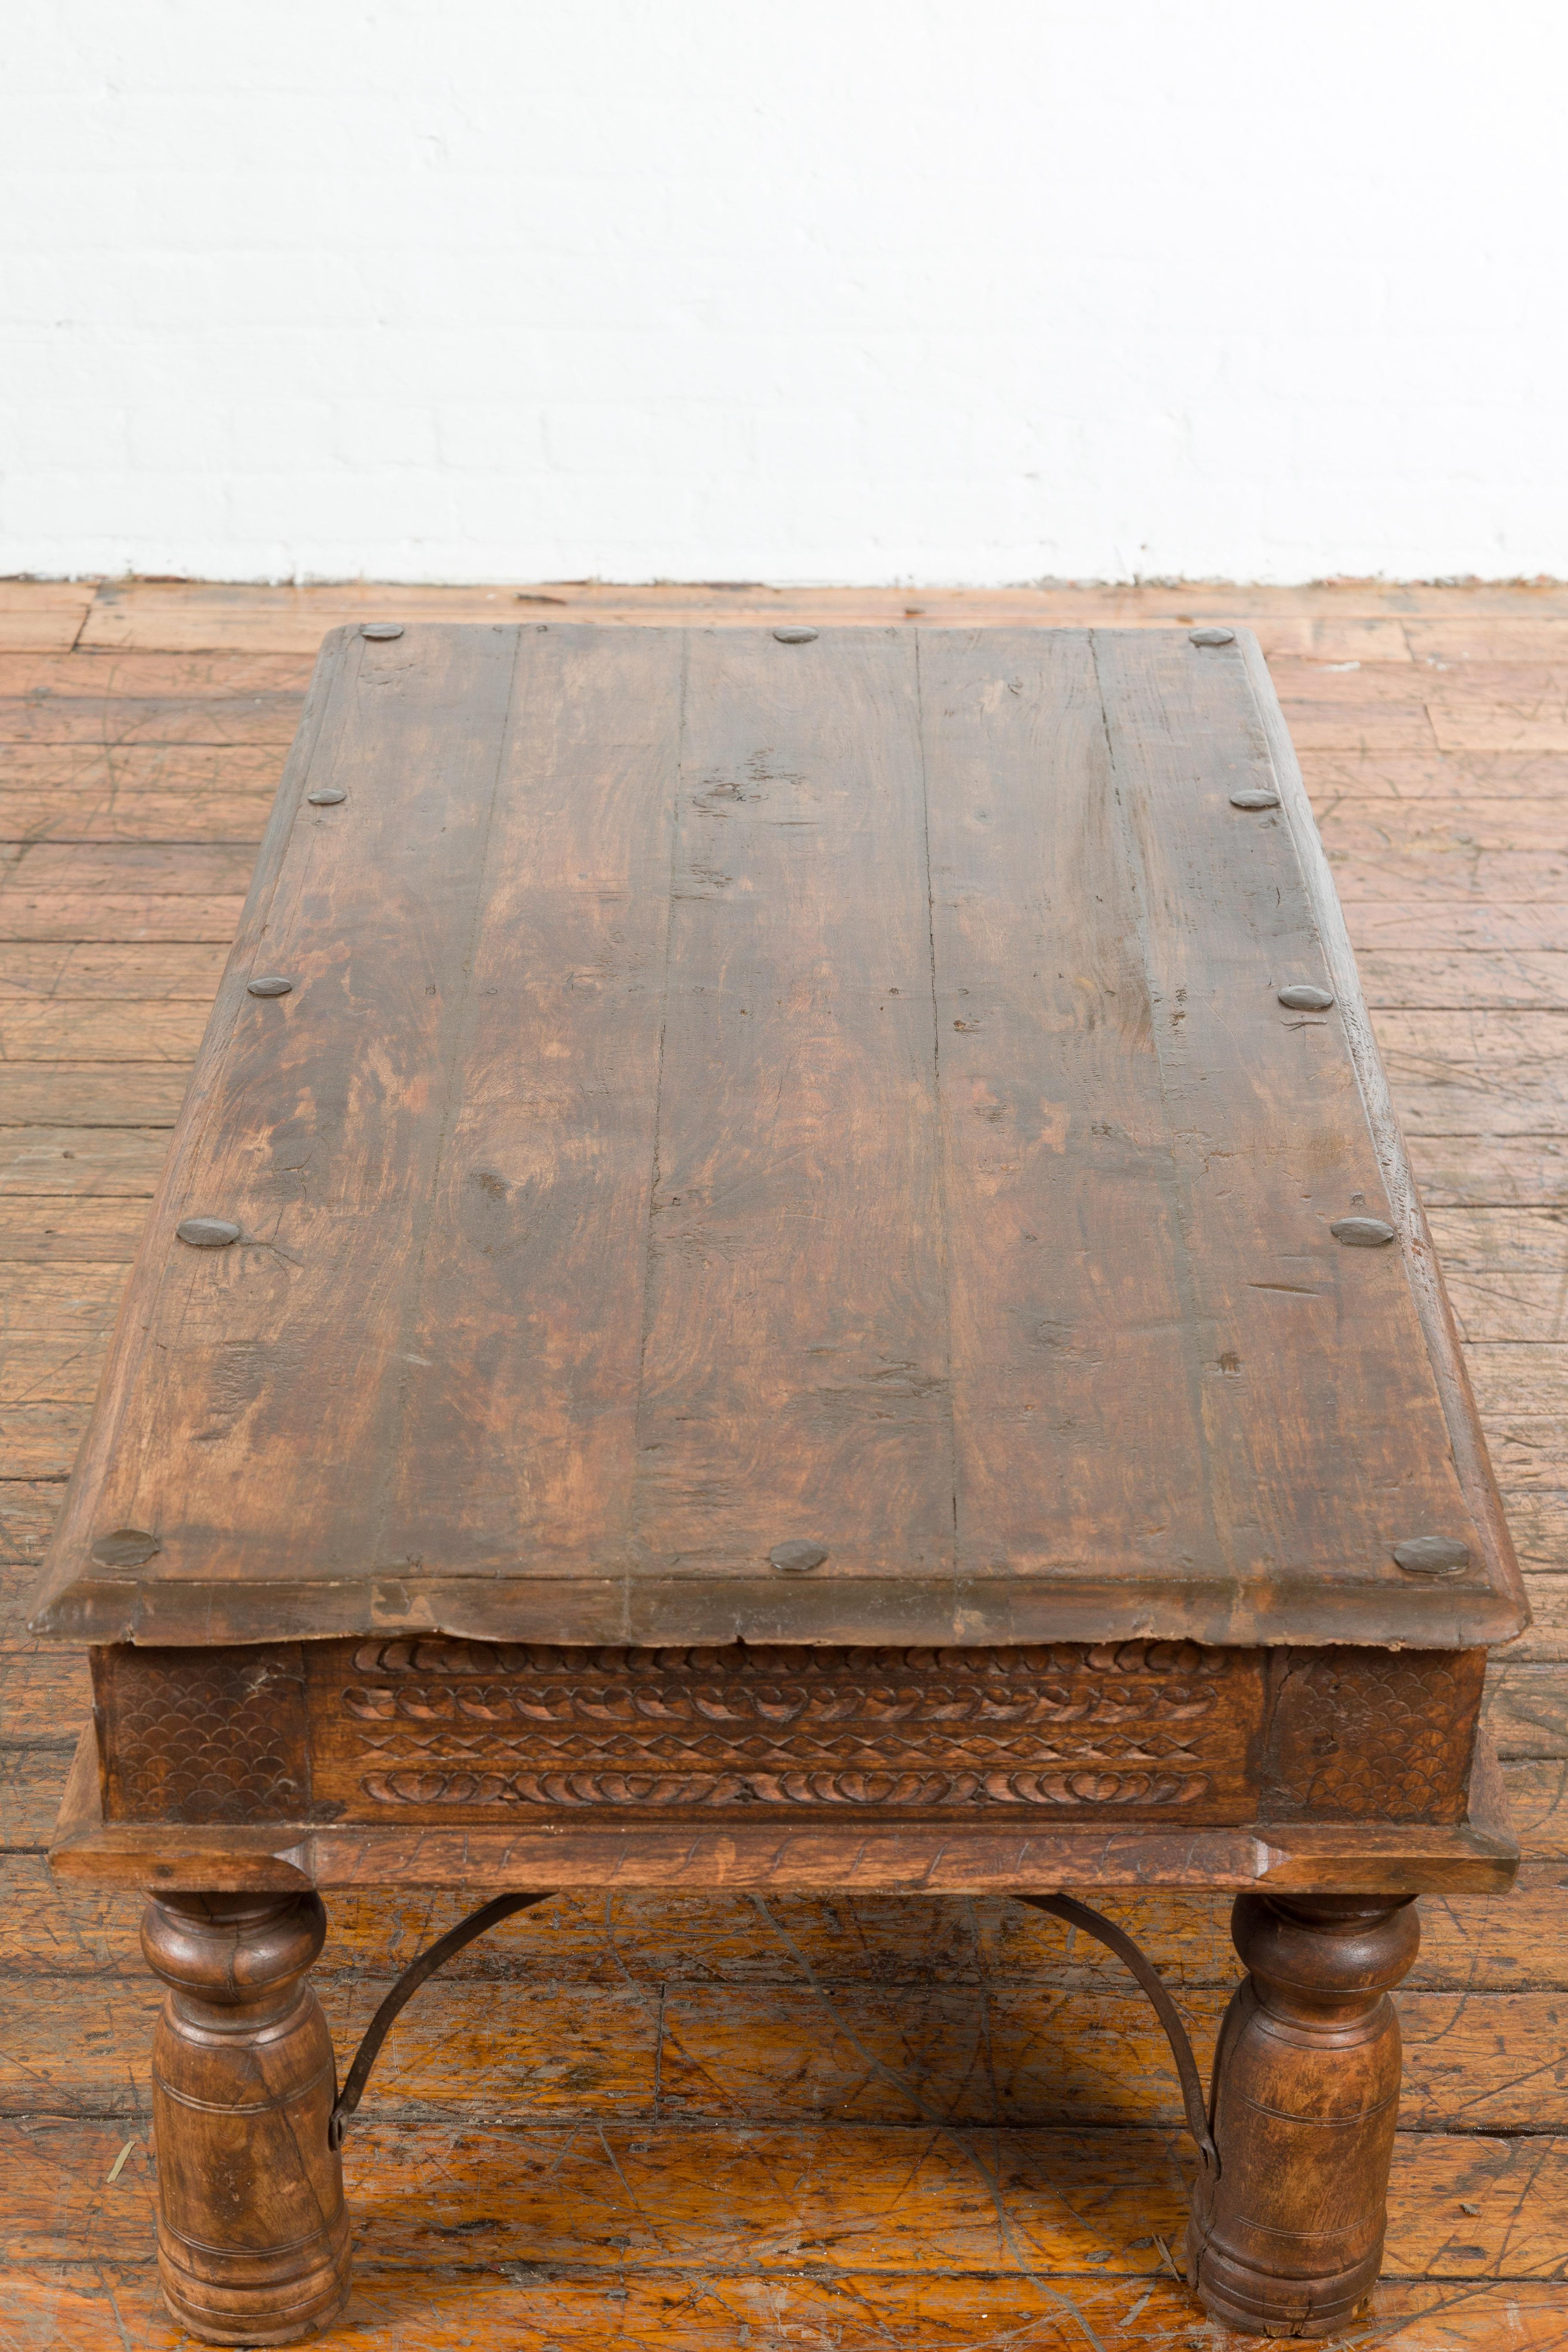 19th Century Indian Rustic Coffee Table with Carved Apron and Iron Accents 9